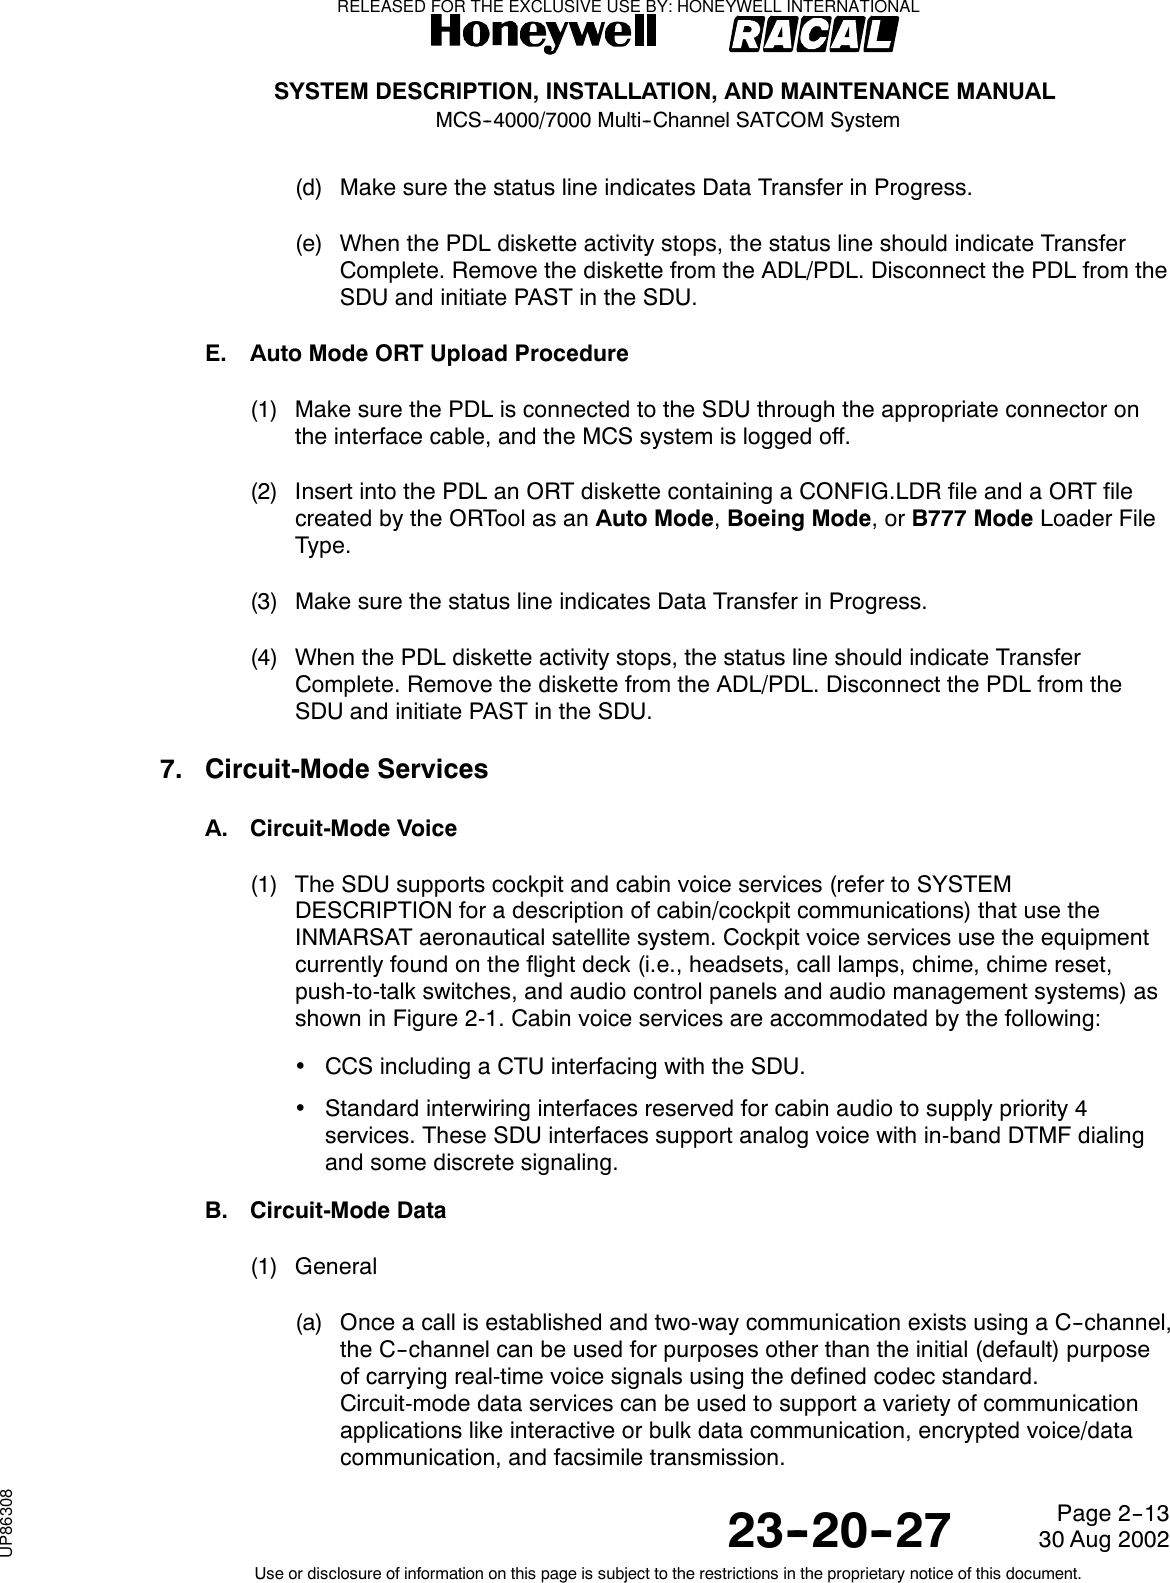 SYSTEM DESCRIPTION, INSTALLATION, AND MAINTENANCE MANUALMCS--4000/7000 Multi--Channel SATCOM System23--20--2730 Aug 2002Use or disclosure of information on this page is subject to the restrictions in the proprietary notice of this document.Page 2--13(d) Make sure the status line indicates Data Transfer in Progress.(e) When the PDL diskette activity stops, the status line should indicate TransferComplete. Remove the diskette from the ADL/PDL. Disconnect the PDL from theSDU and initiate PAST in the SDU.E. Auto Mode ORT Upload Procedure(1) Make sure the PDL is connected to the SDU through the appropriate connector onthe interface cable, and the MCS system is logged off.(2) Insert into the PDL an ORT diskette containing a CONFIG.LDR file and a ORT filecreated by the ORTool as an Auto Mode,Boeing Mode,orB777 Mode Loader FileType.(3) Make sure the status line indicates Data Transfer in Progress.(4) When the PDL diskette activity stops, the status line should indicate TransferComplete. Remove the diskette from the ADL/PDL. Disconnect the PDL from theSDU and initiate PAST in the SDU.7. Circuit-Mode ServicesA. Circuit-Mode Voice(1) The SDU supports cockpit and cabin voice services (refer to SYSTEMDESCRIPTION for a description of cabin/cockpit communications) that use theINMARSAT aeronautical satellite system. Cockpit voice services use the equipmentcurrently found on the flight deck (i.e., headsets, call lamps, chime, chime reset,push-to-talk switches, and audio control panels and audio management systems) asshown in Figure 2-1. Cabin voice services are accommodated by the following:•CCS including a CTU interfacing with the SDU.•Standard interwiring interfaces reserved for cabin audio to supply priority 4services. These SDU interfaces support analog voice with in-band DTMF dialingand some discrete signaling.B. Circuit-Mode Data(1) General(a) Once a call is established and two-way communication exists using a C--channel,the C--channel can be used for purposes other than the initial (default) purposeof carrying real-time voice signals using the defined codec standard.Circuit-mode data services can be used to support a variety of communicationapplications like interactive or bulk data communication, encrypted voice/datacommunication, and facsimile transmission.RELEASED FOR THE EXCLUSIVE USE BY: HONEYWELL INTERNATIONALUP86308